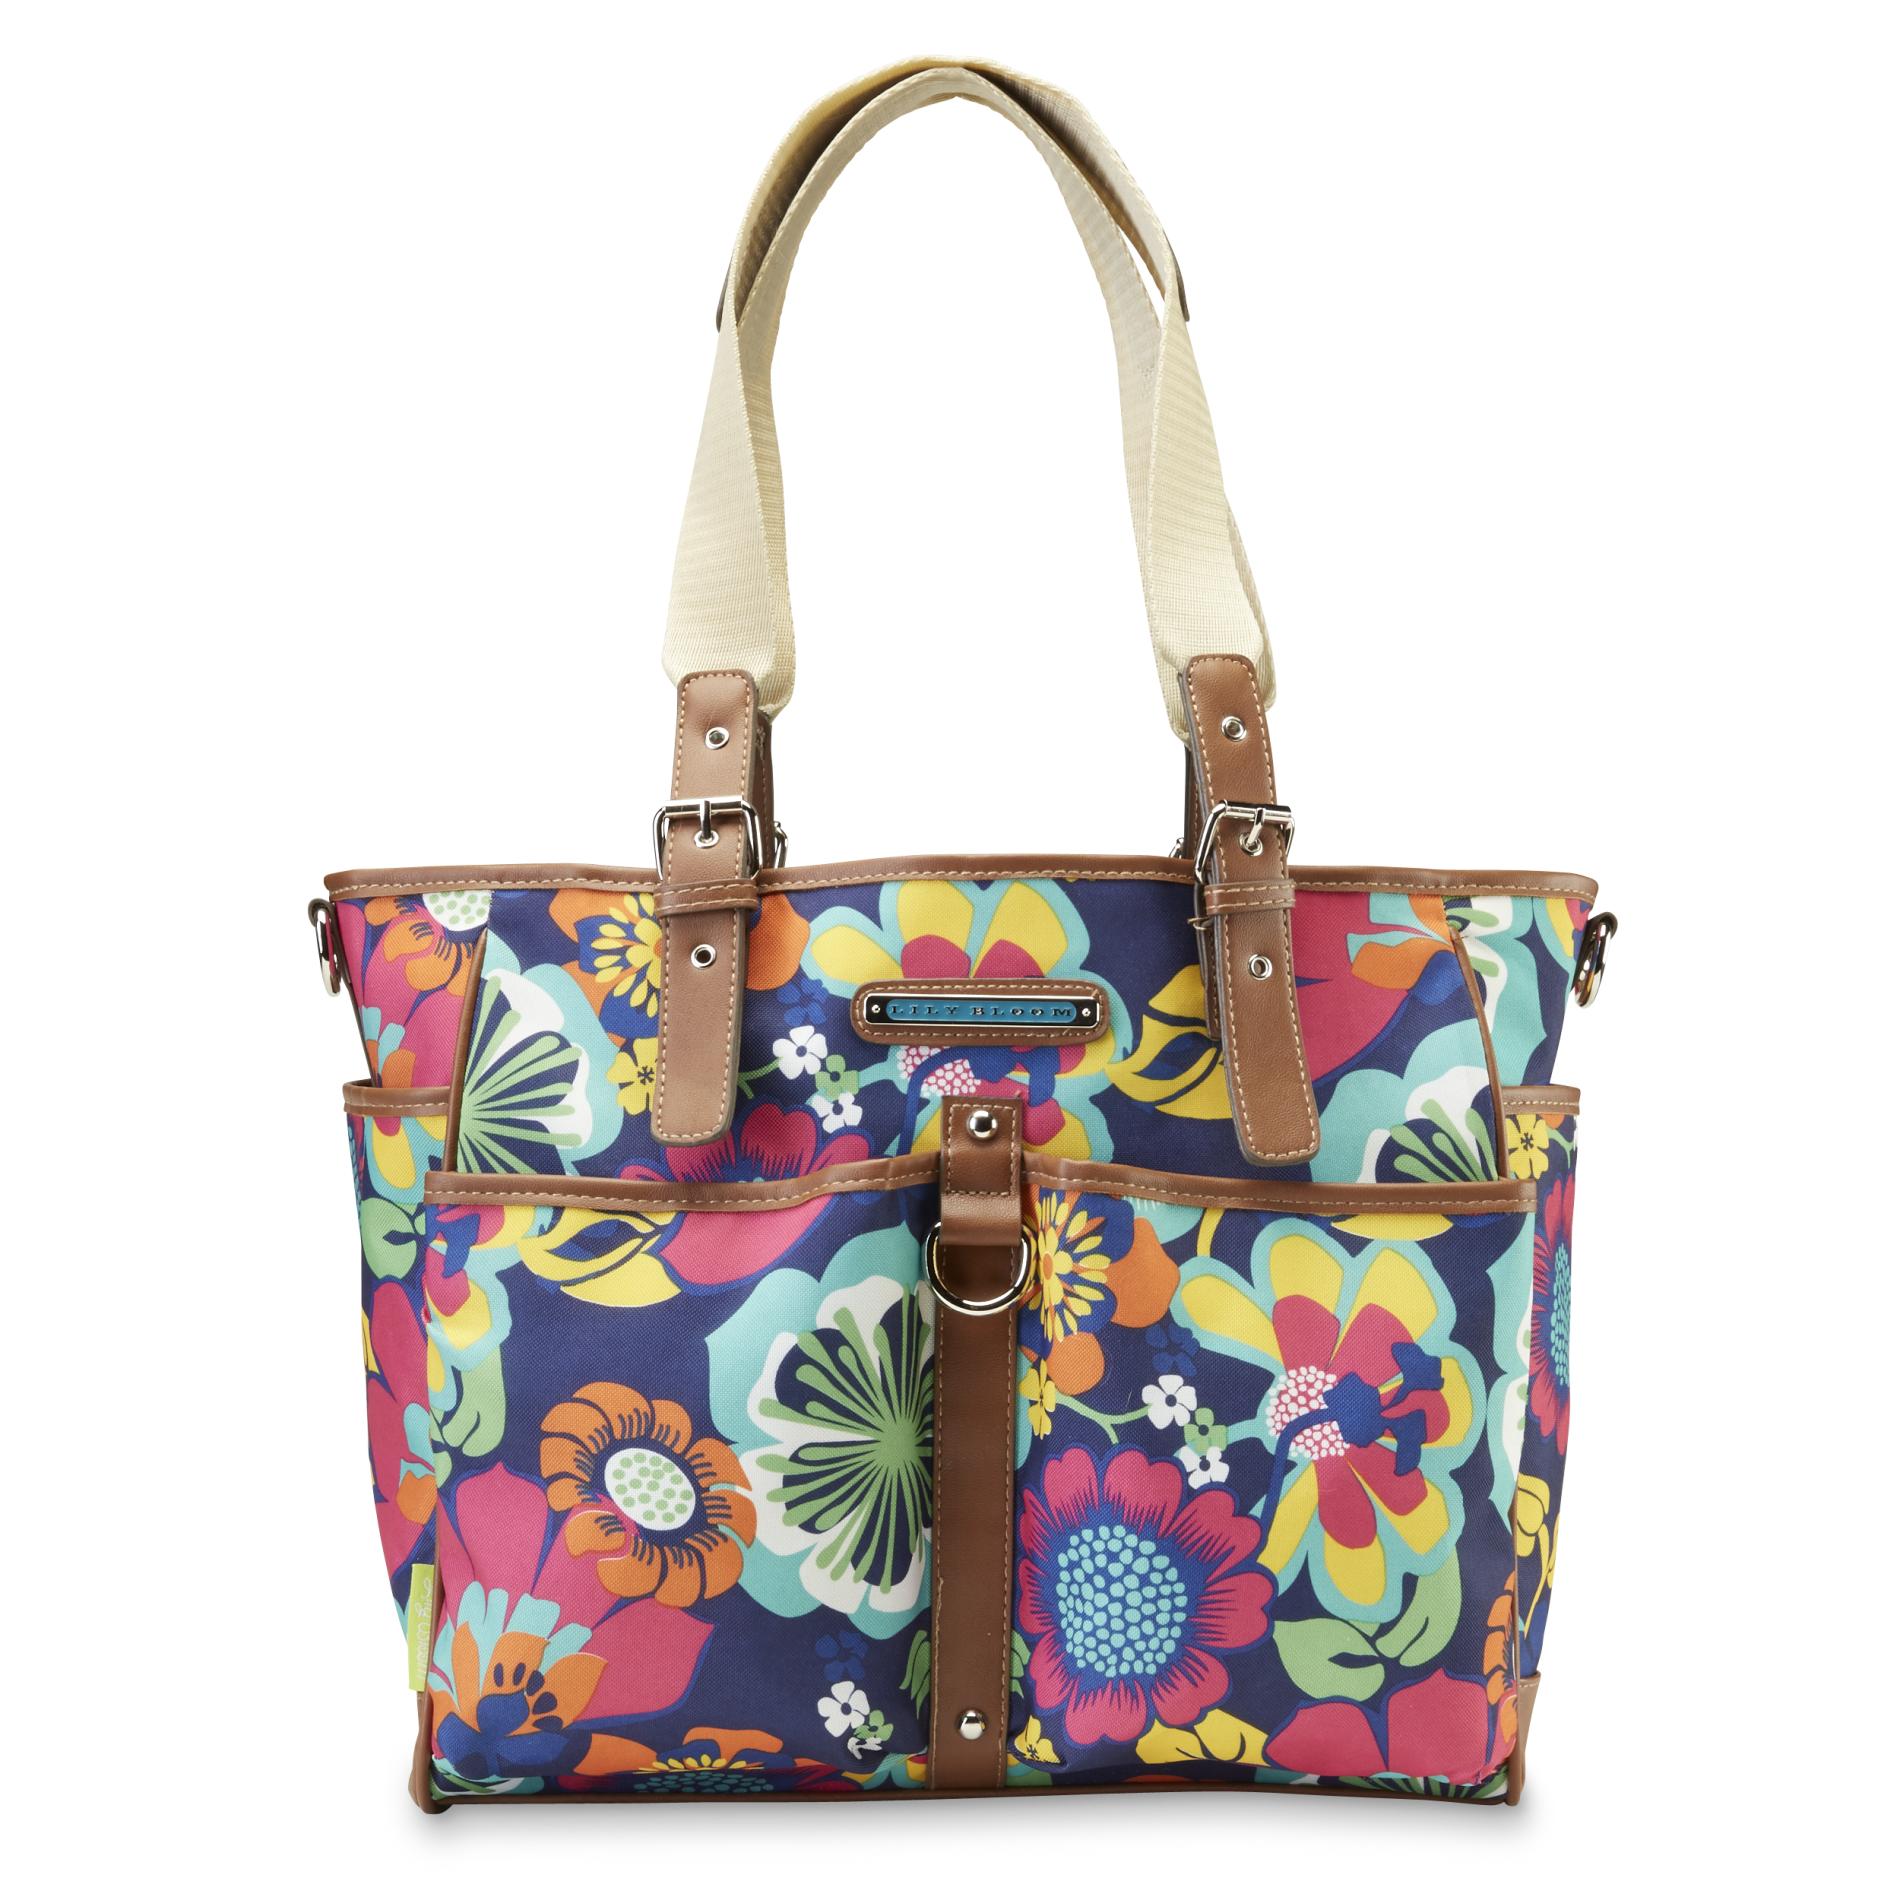 Lily Bloom Women's Laptop Tote Bag - Floral